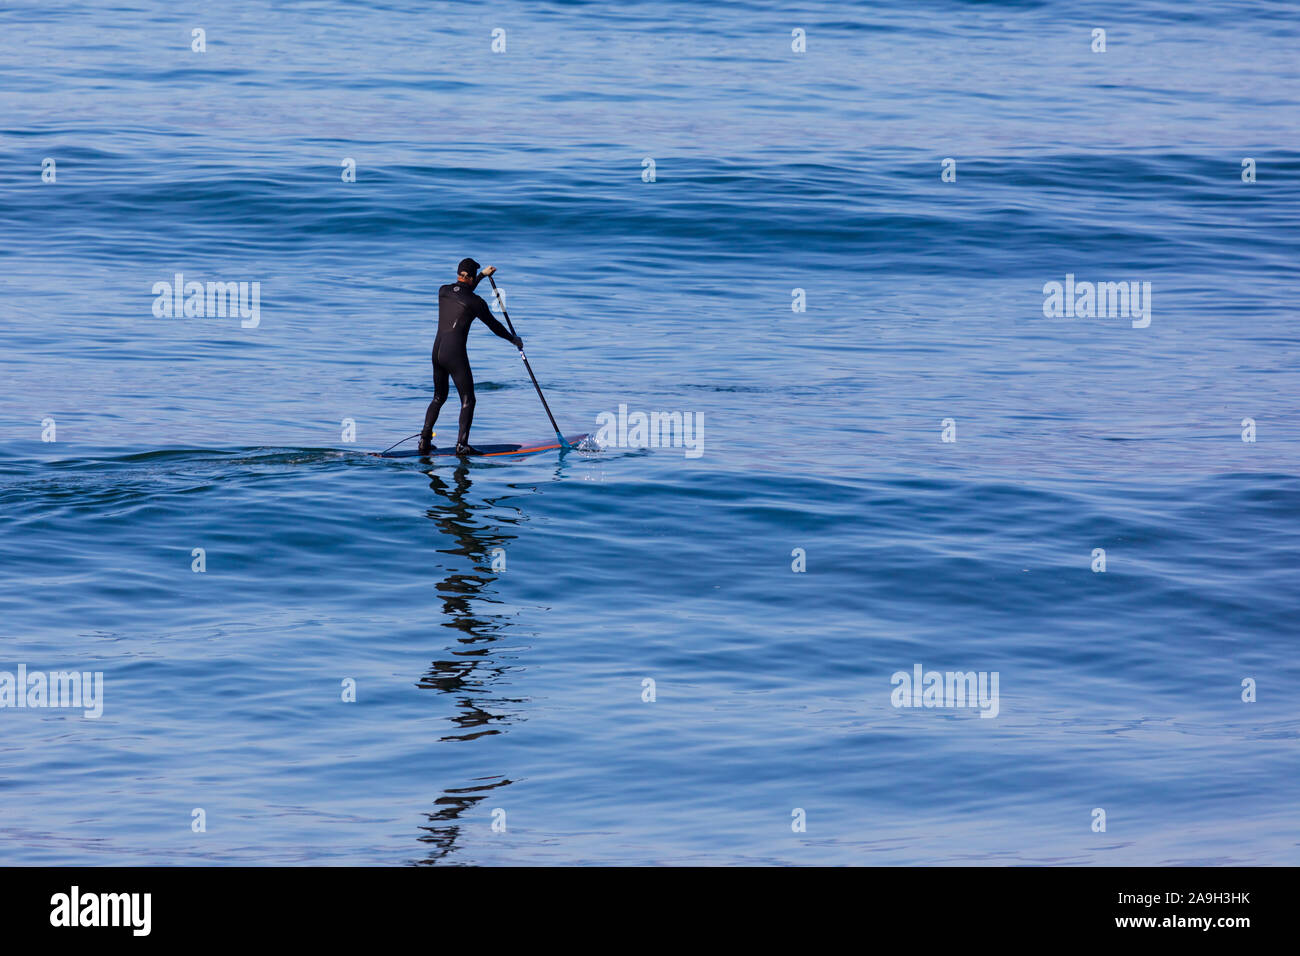 A man on a paddleboard in the sea off Cambria, California, United States of America. Stock Photo